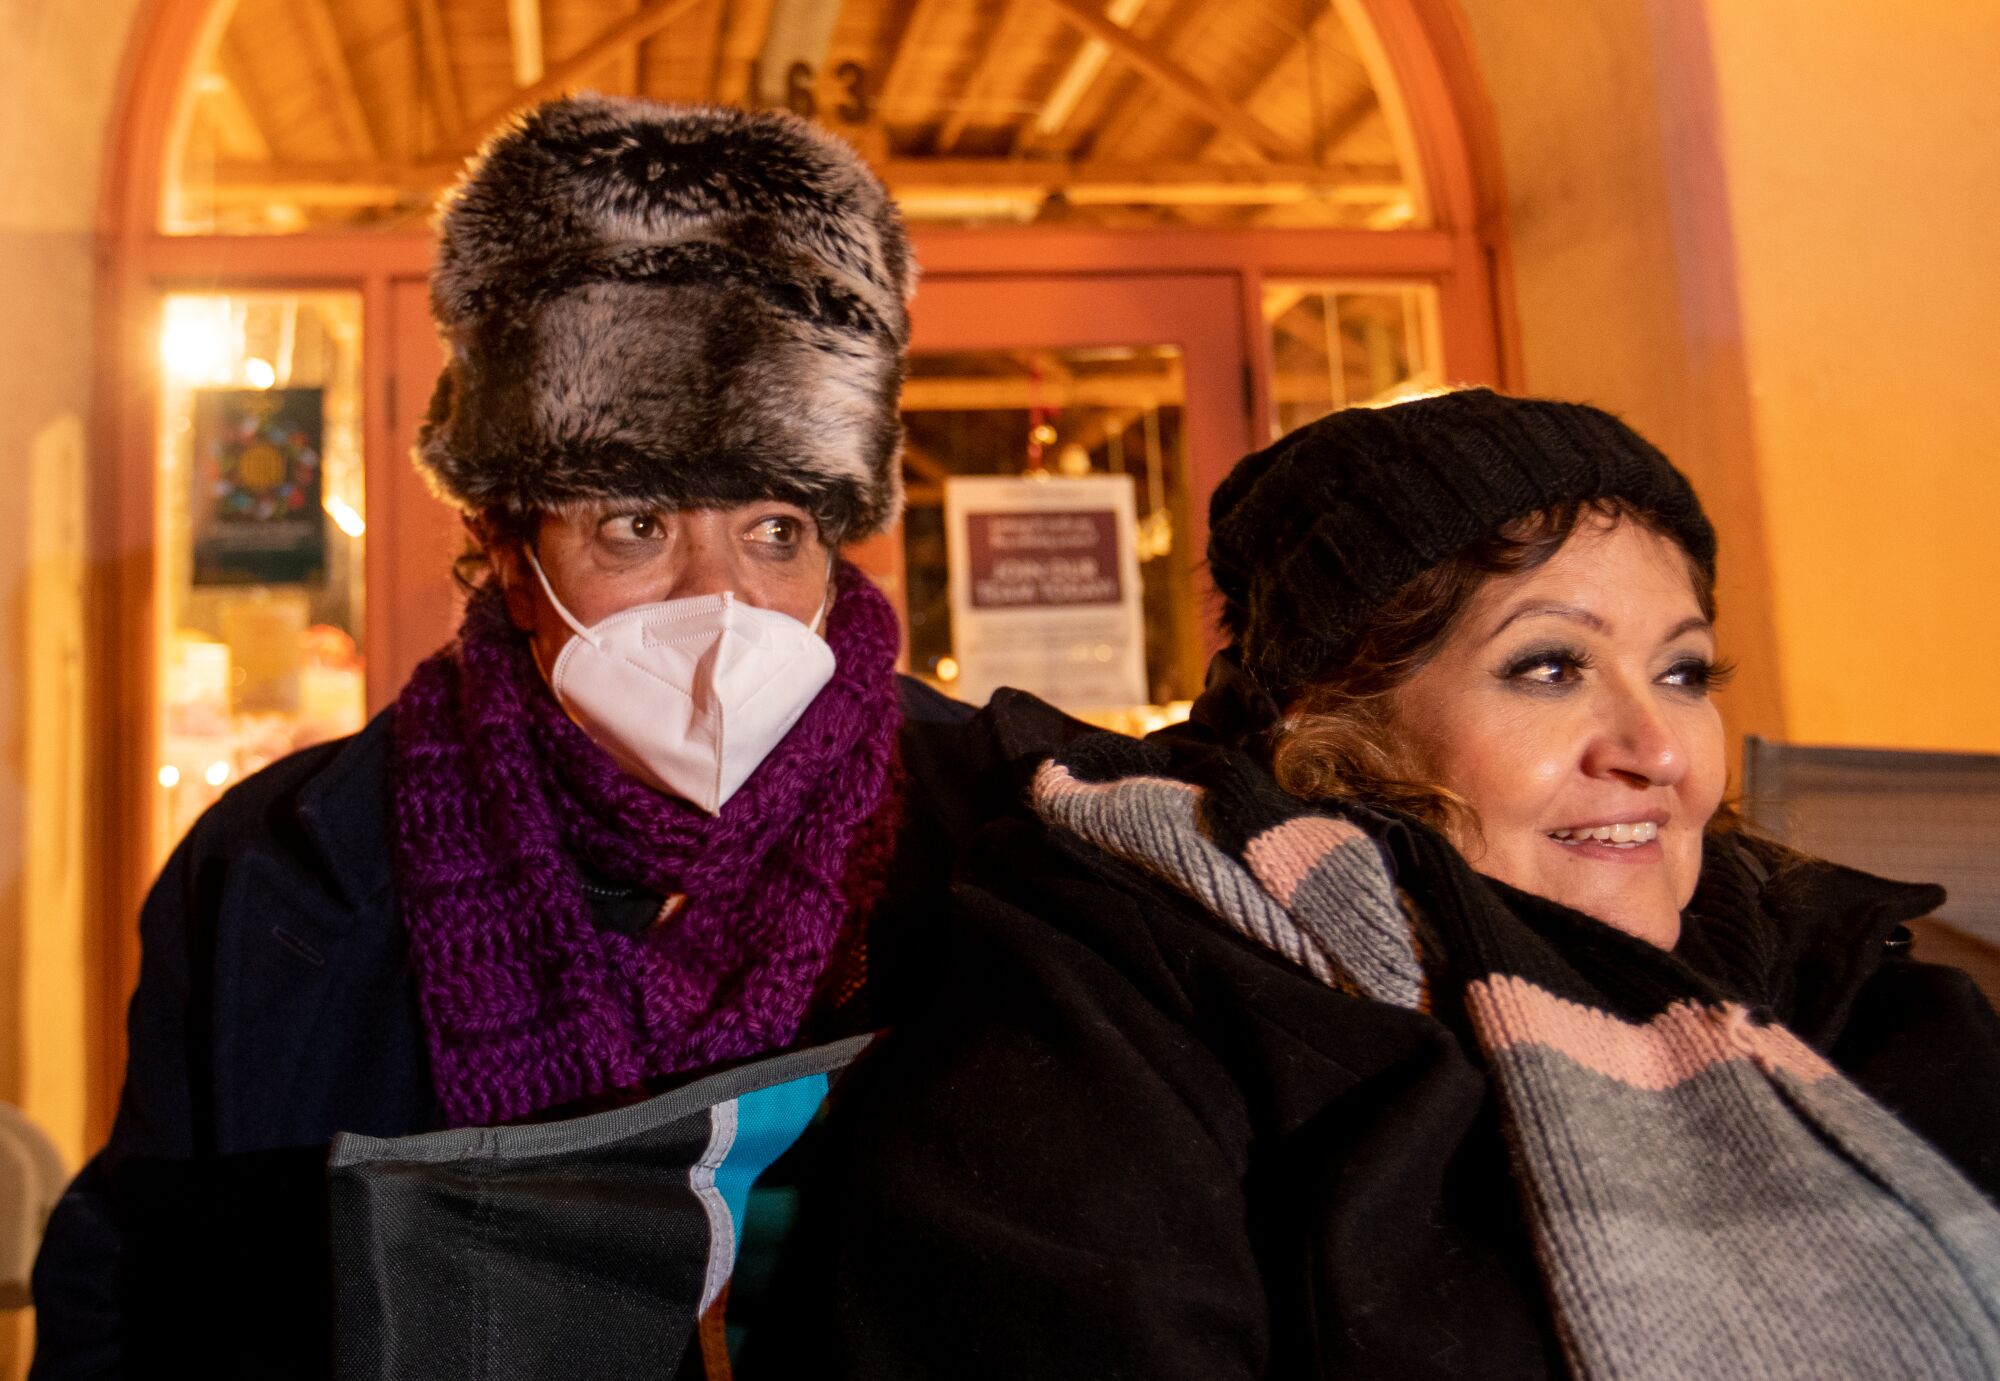 Two people stand wrapped up in hats and coats.